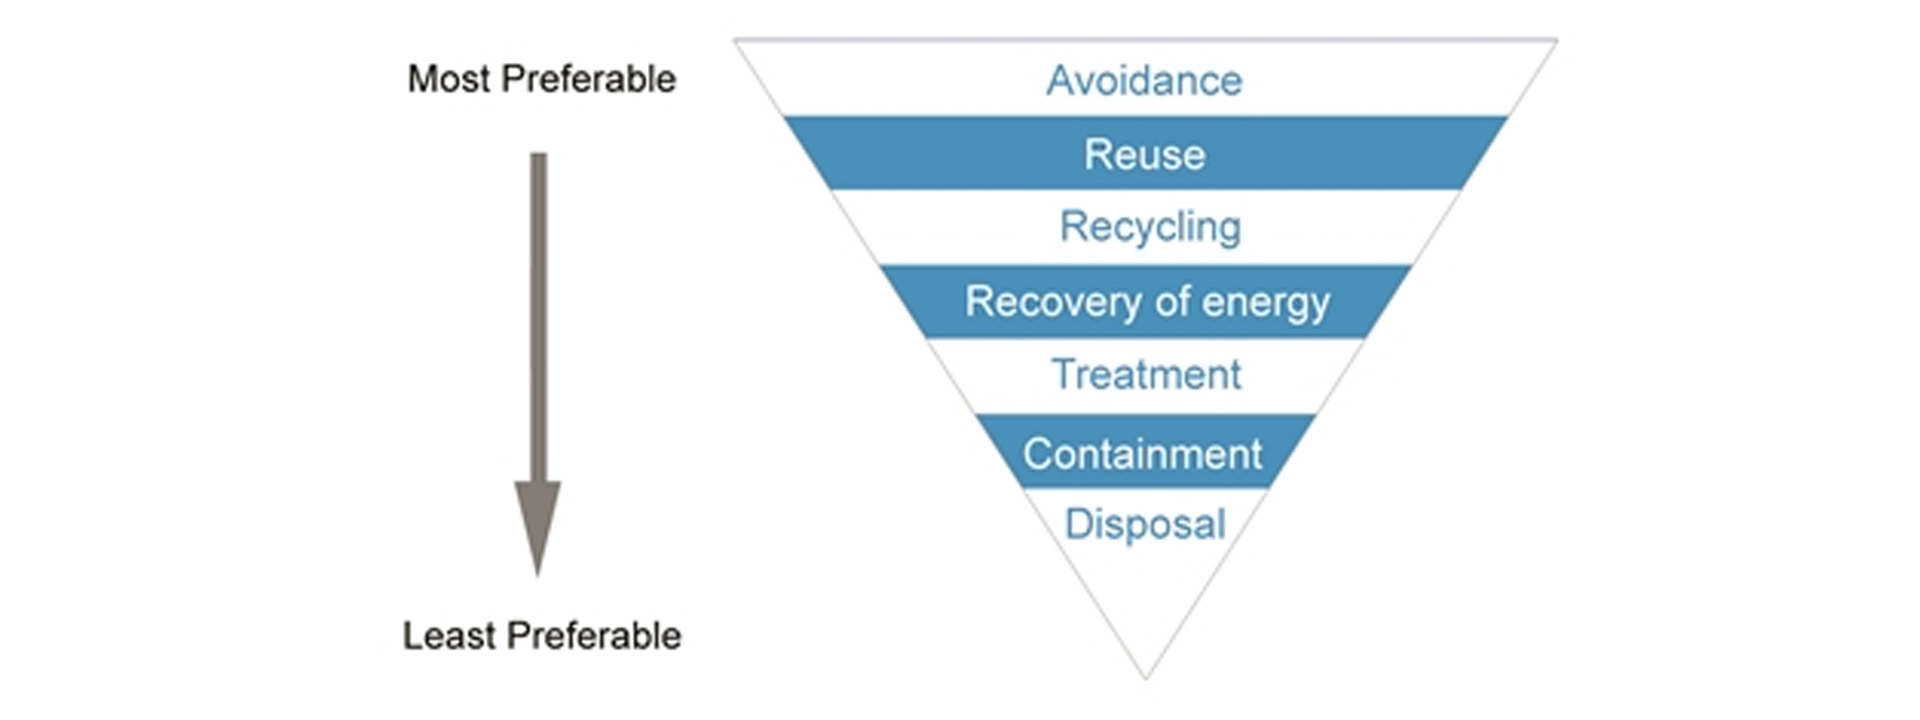 Graphic showing the EPA Victoria Waste Management Hierarchy. The upside down triangle indicates how waste should be managed from most preferable to least preferable. In order of preference there are: avoidance, reuse, recycling, recovery of energy, treatment, containment, disposal